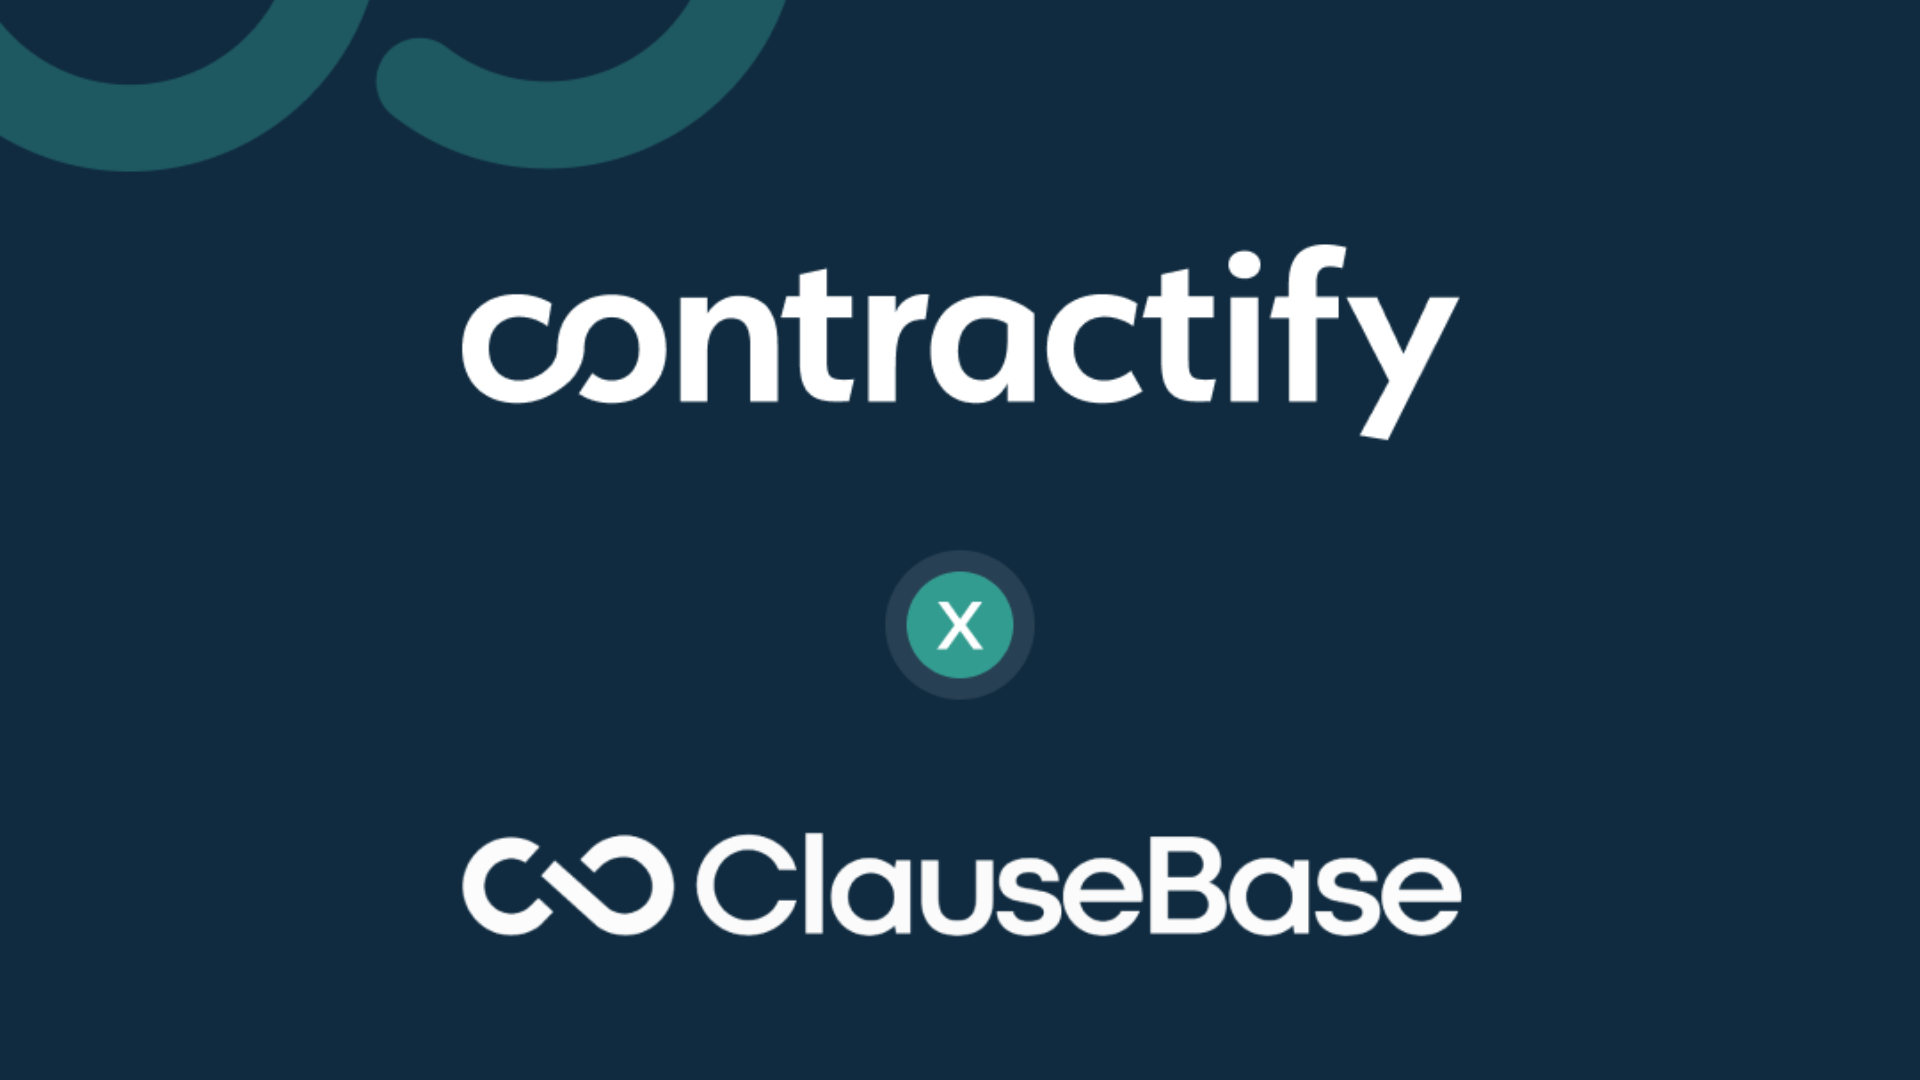 Contractify and ClauseBase Join Forces to Offer a Complete Contract Lifecycle Solution